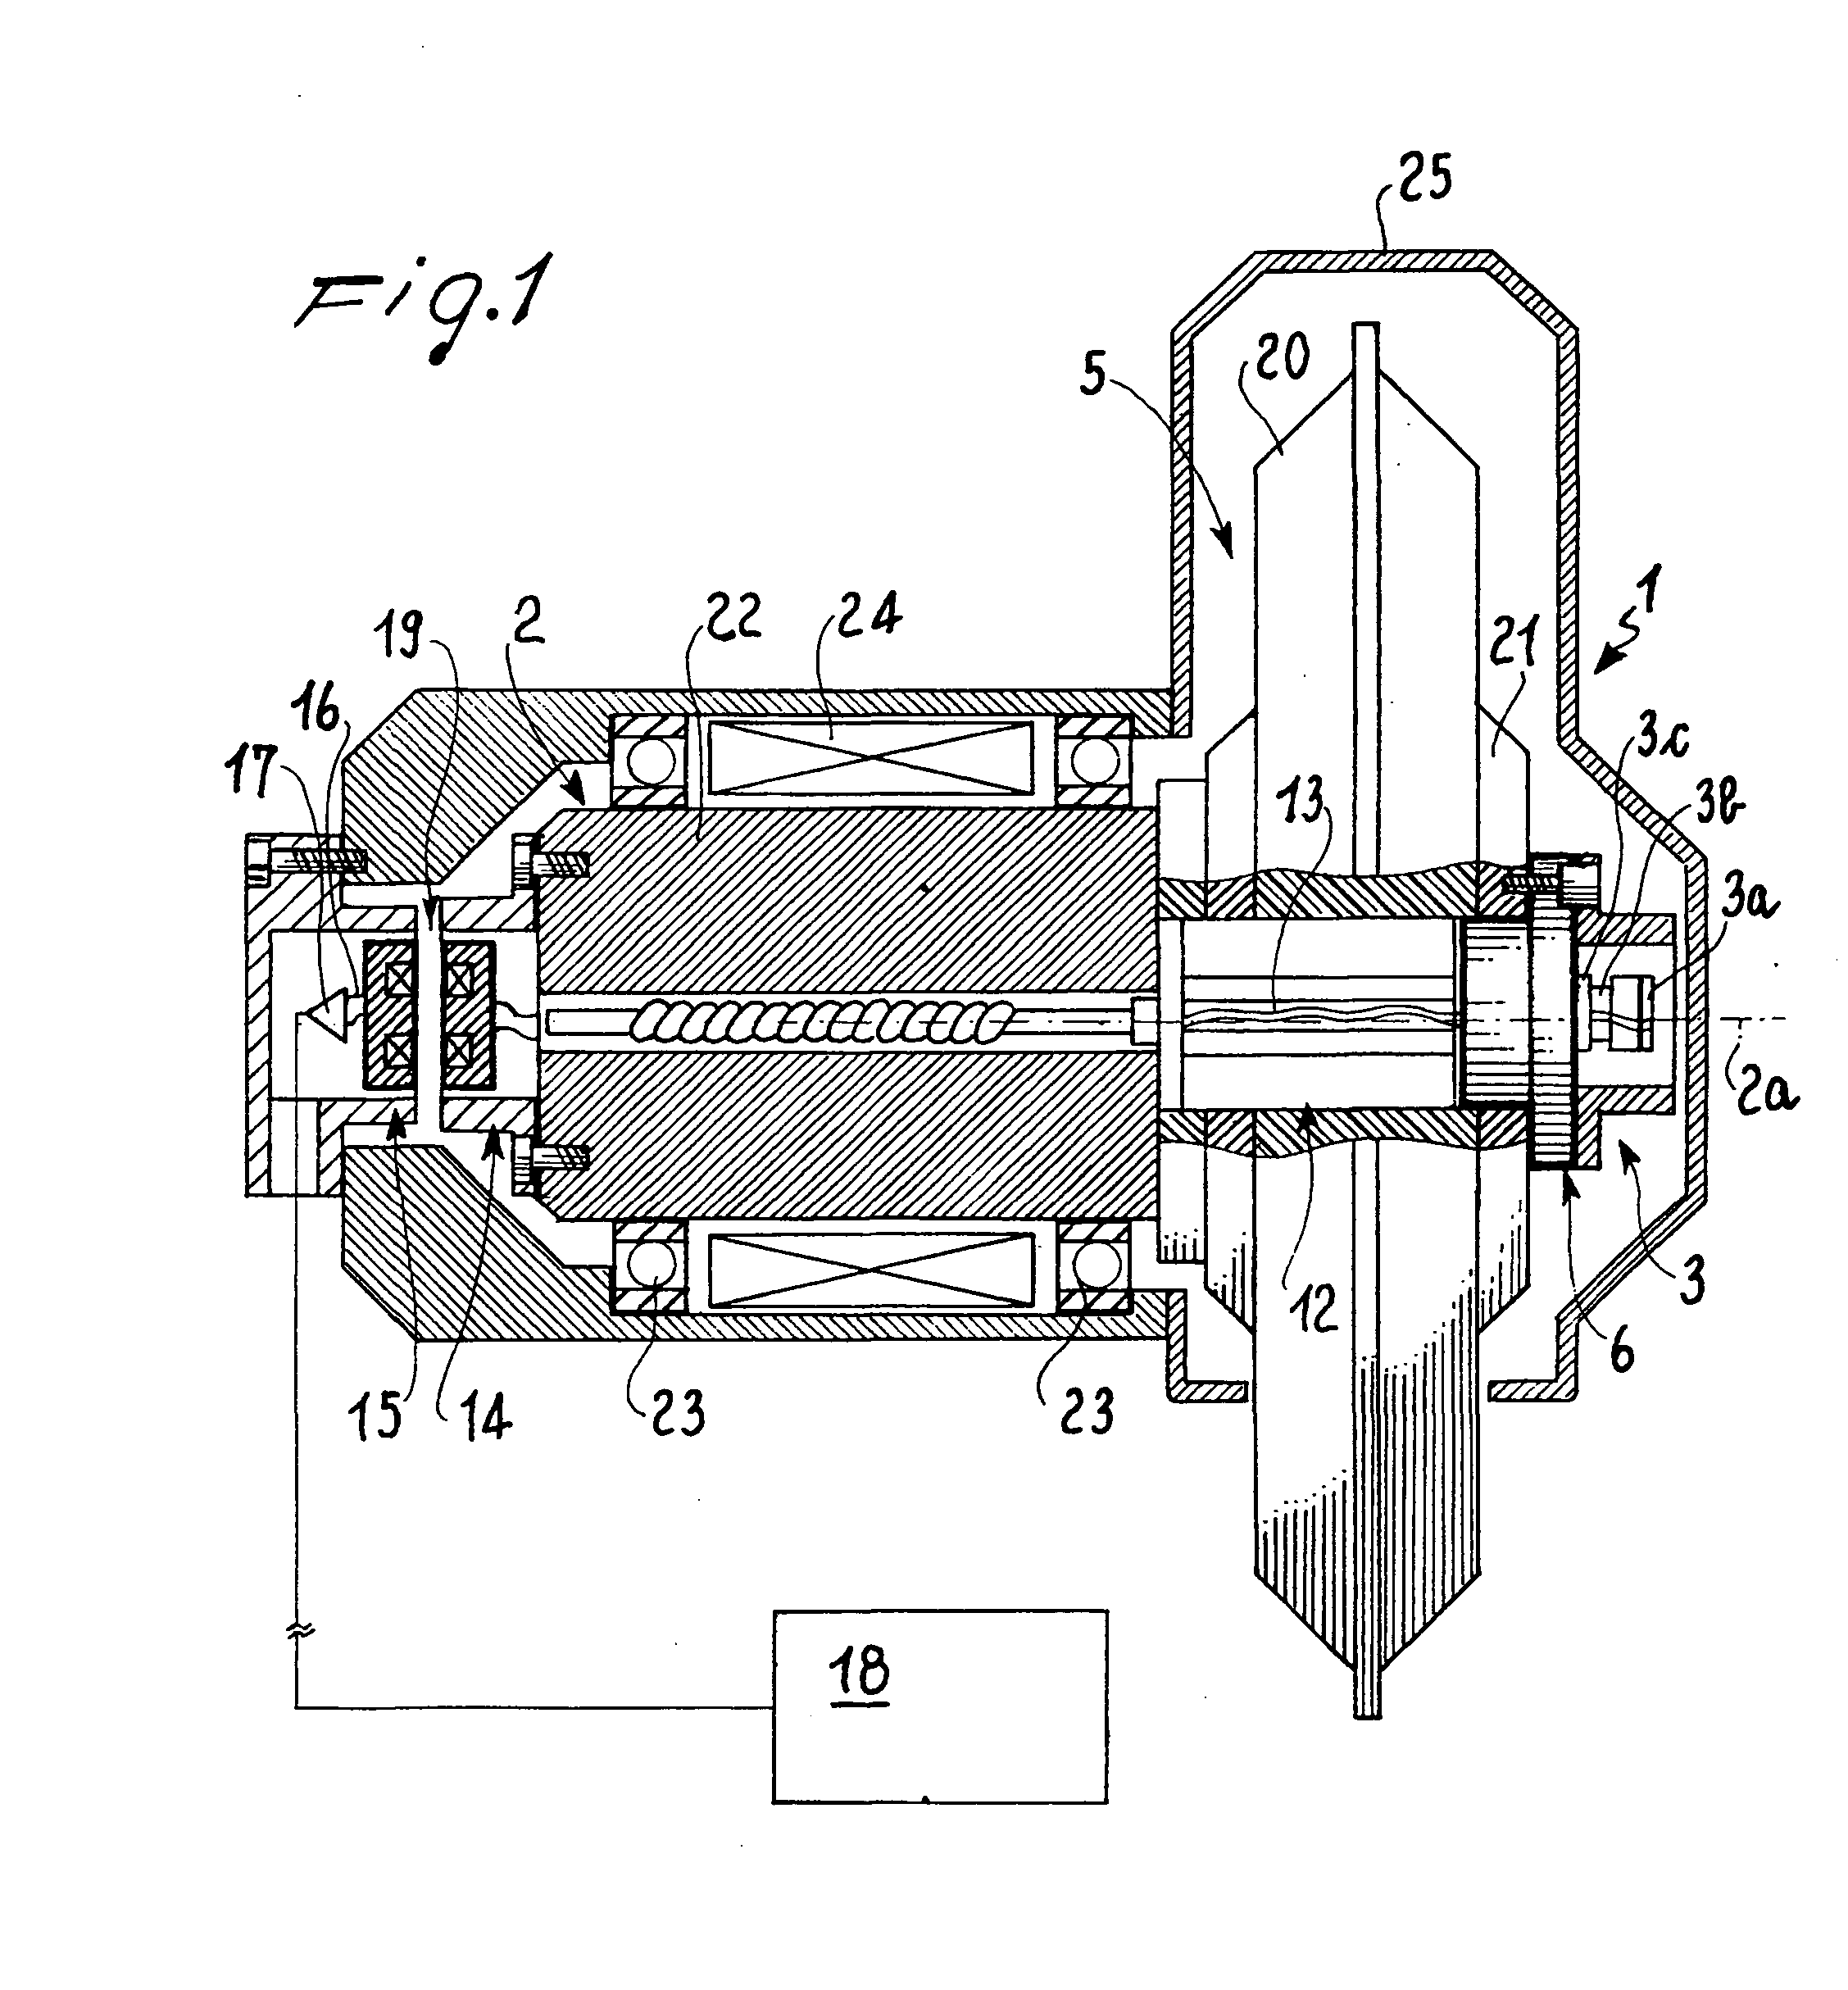 Apparatus for detecting vibrations in a machine tool